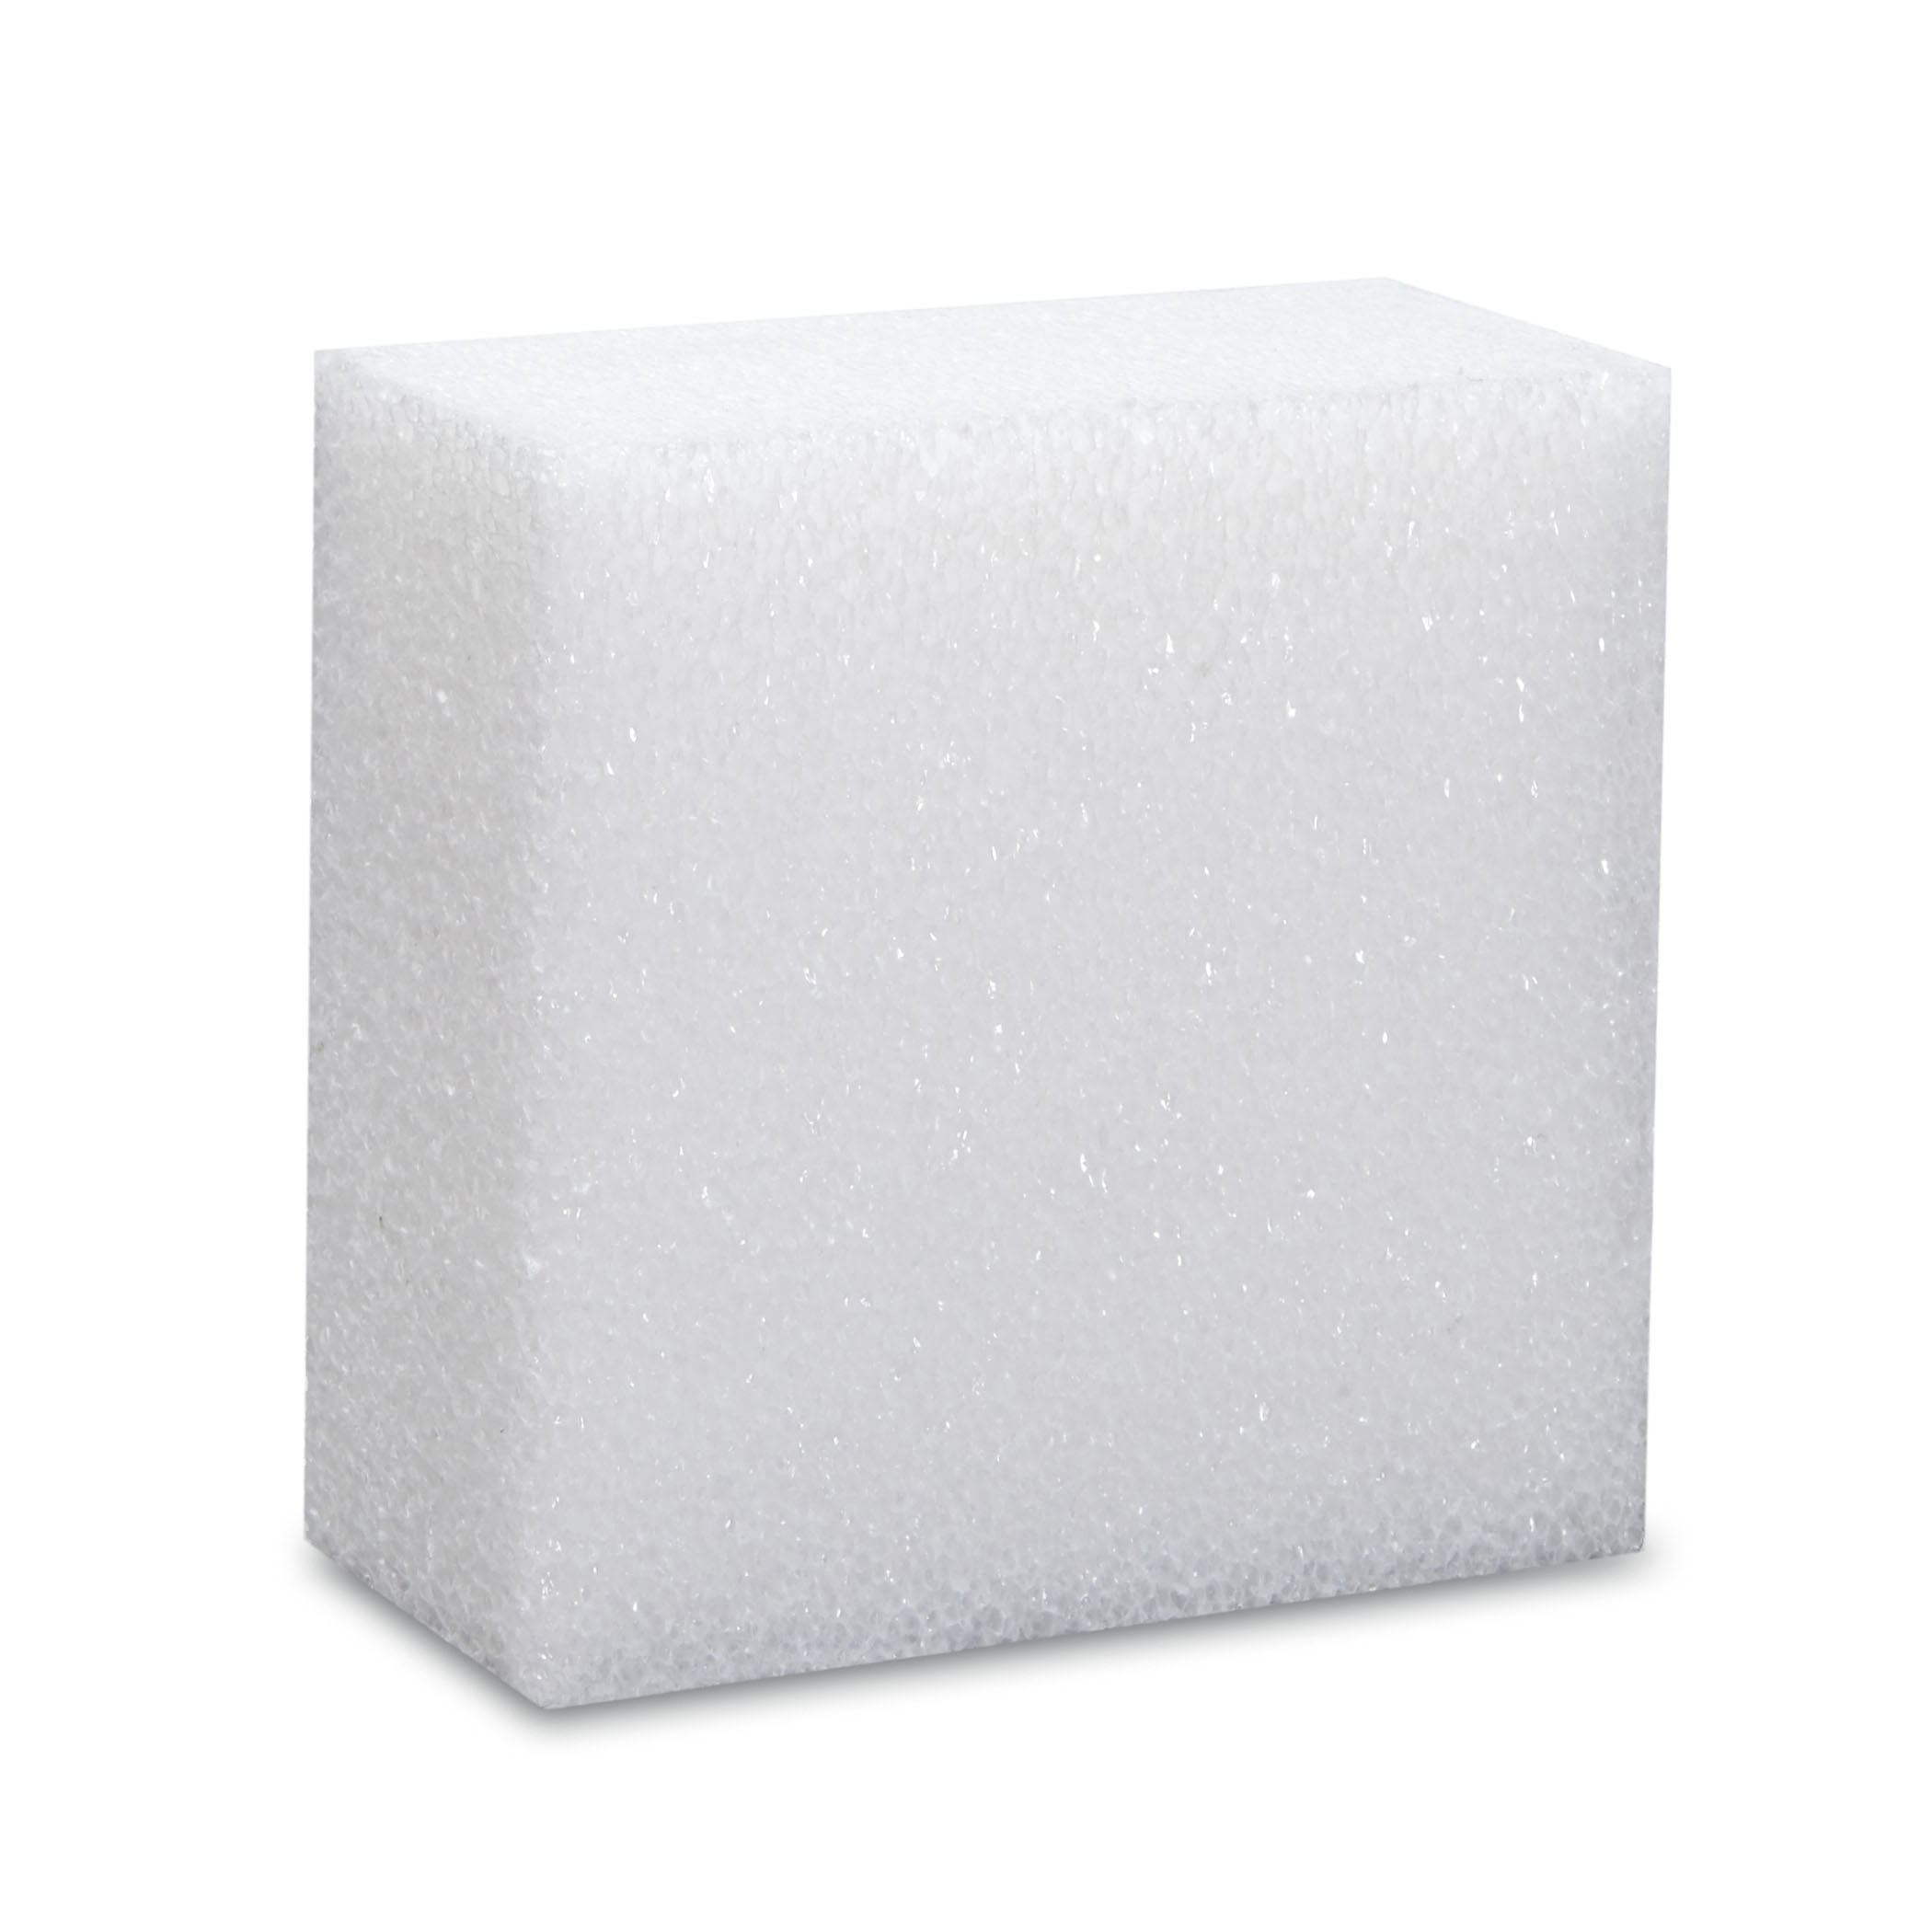 Small Styrofoam Blocks For Arts And Crafts 60 PCS 4 1/2 X 4 1/2 X 0.75  In